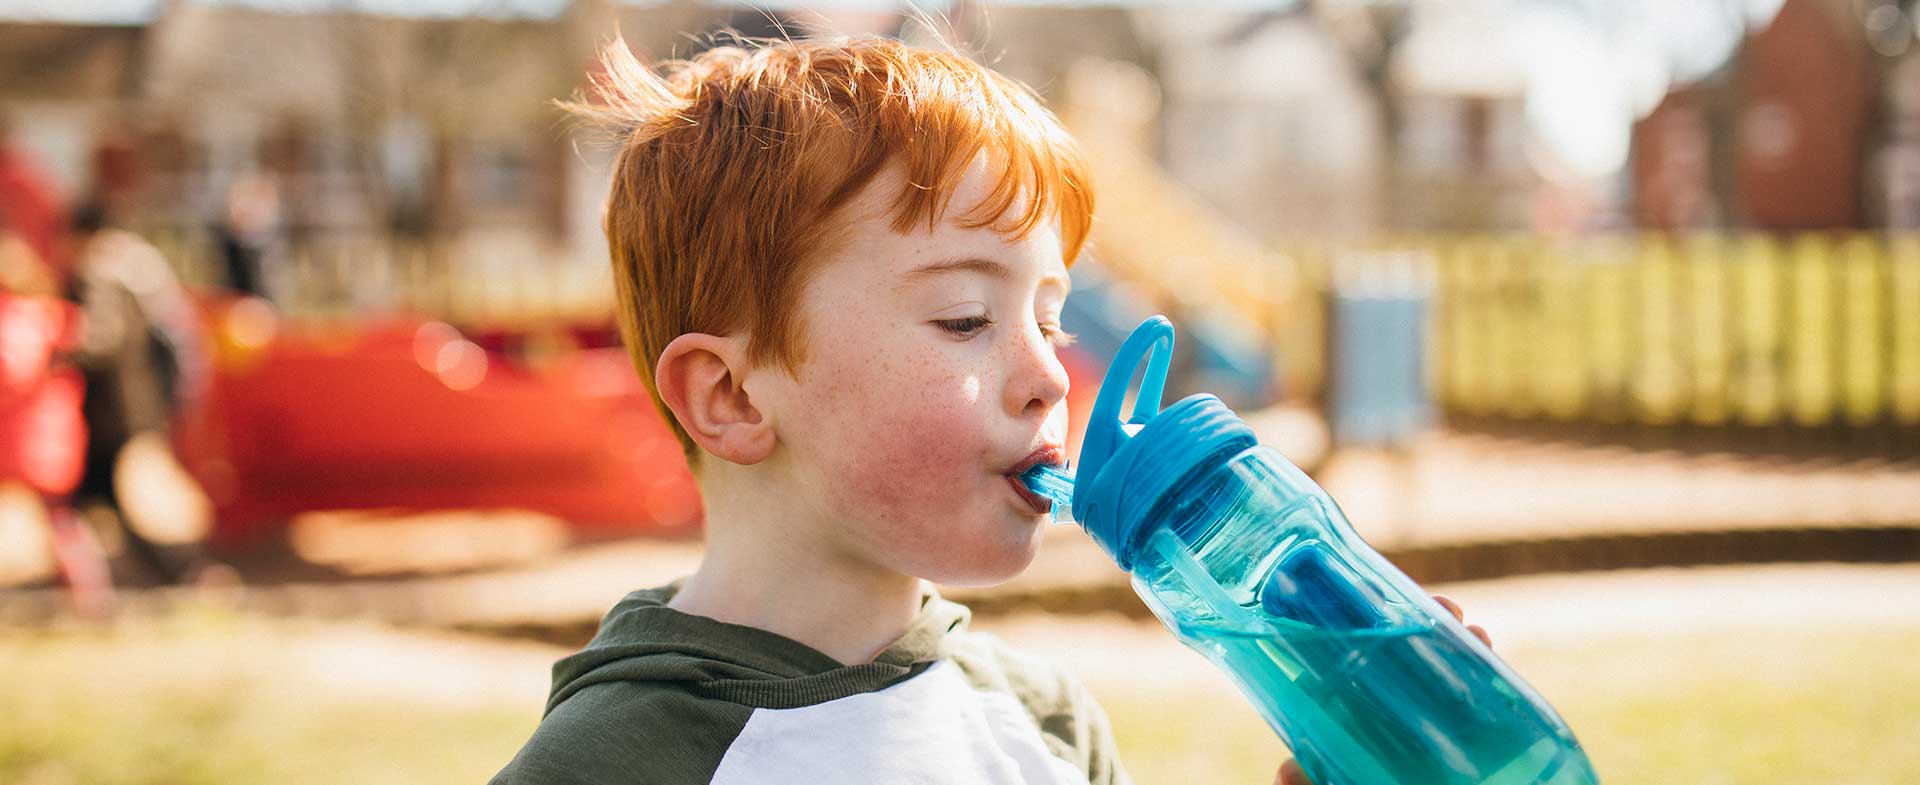 12 Ways To Keep Kids Hydrated From A Boy Mom - Healthy By Heather Brown